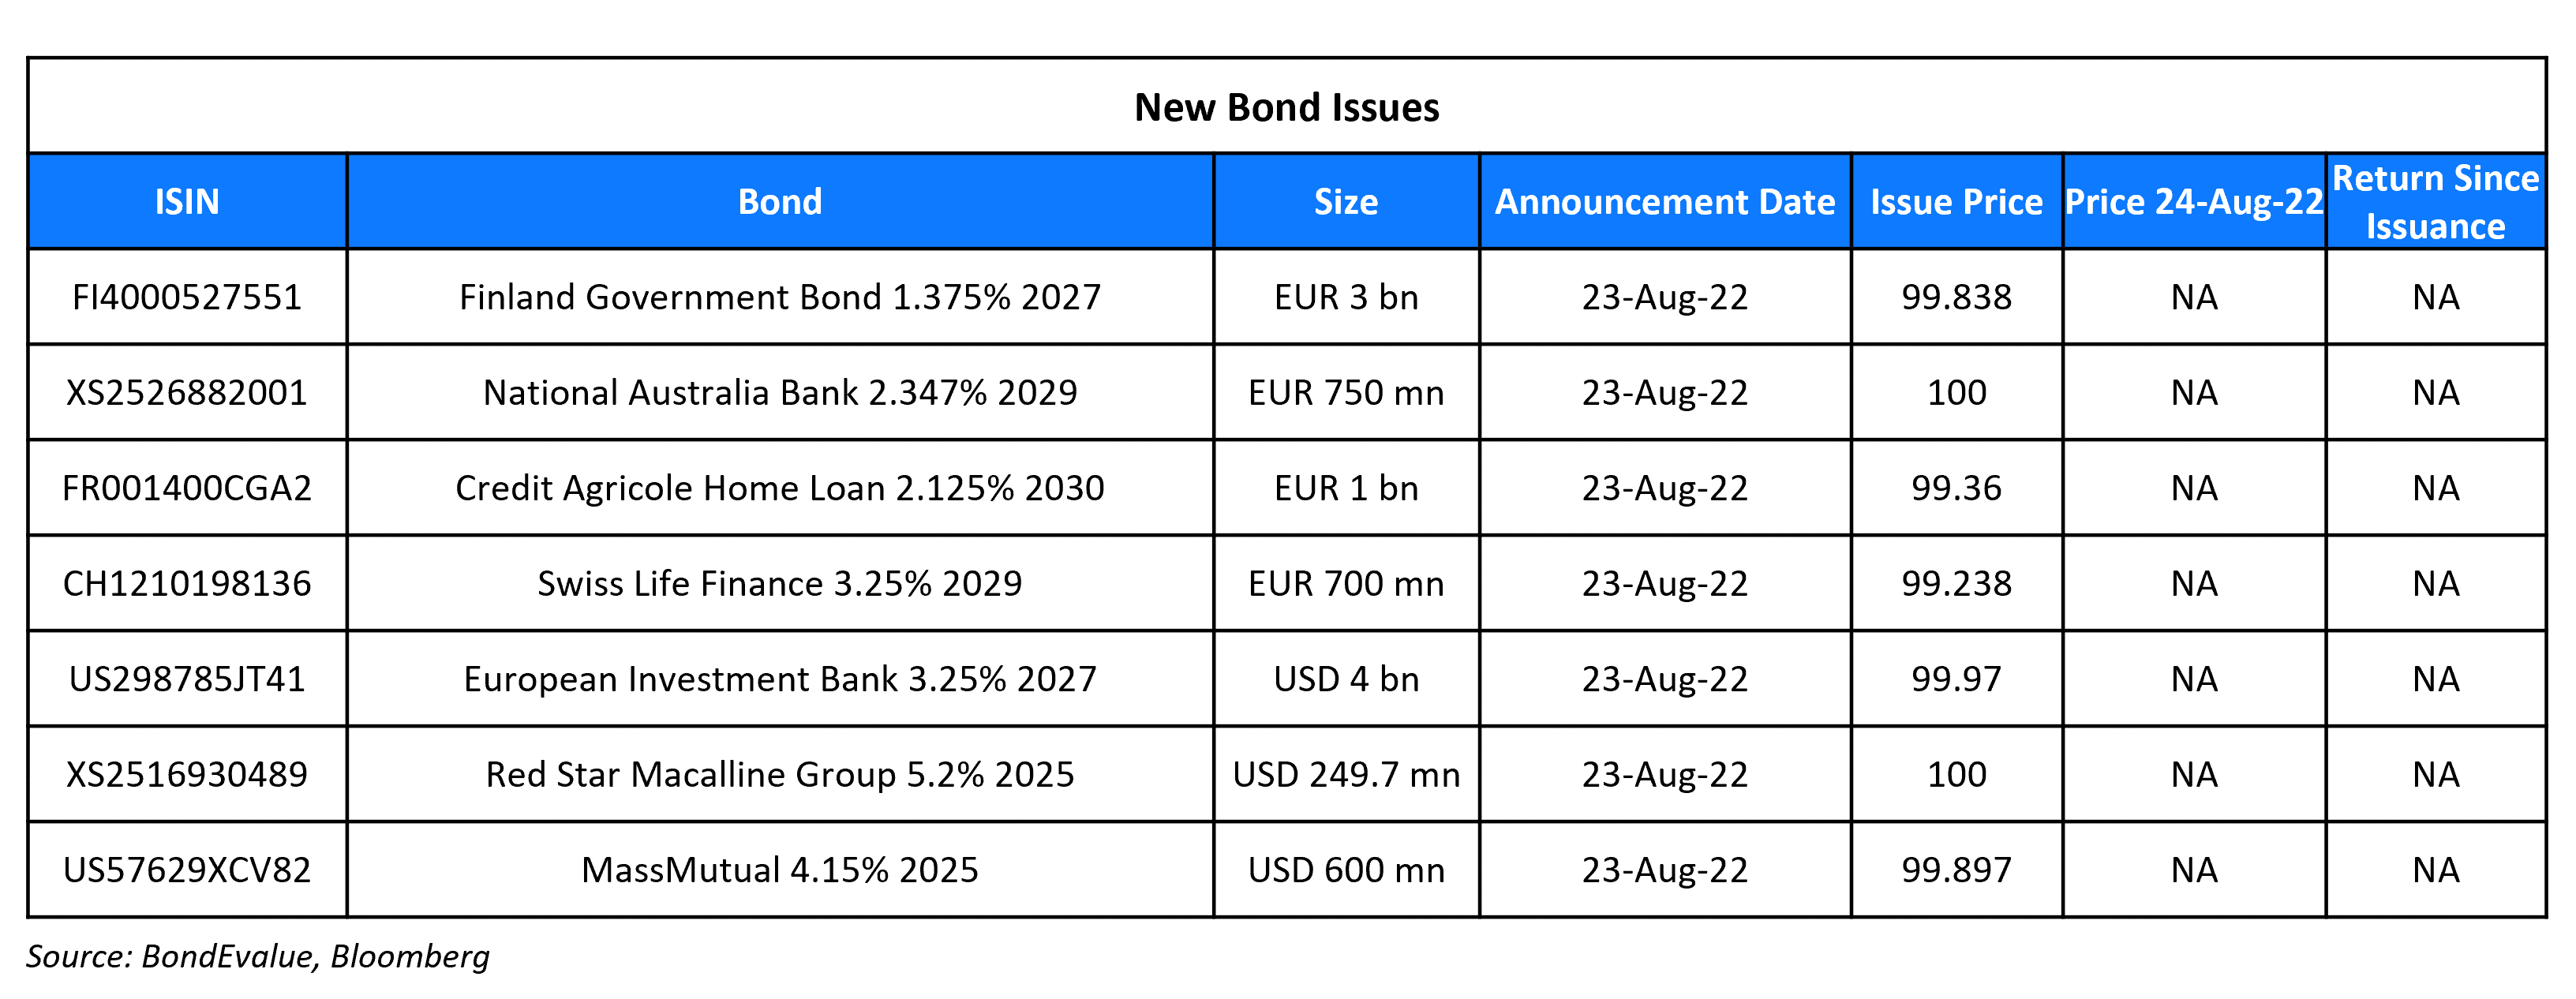 New Bond Issues 24 Aug 22